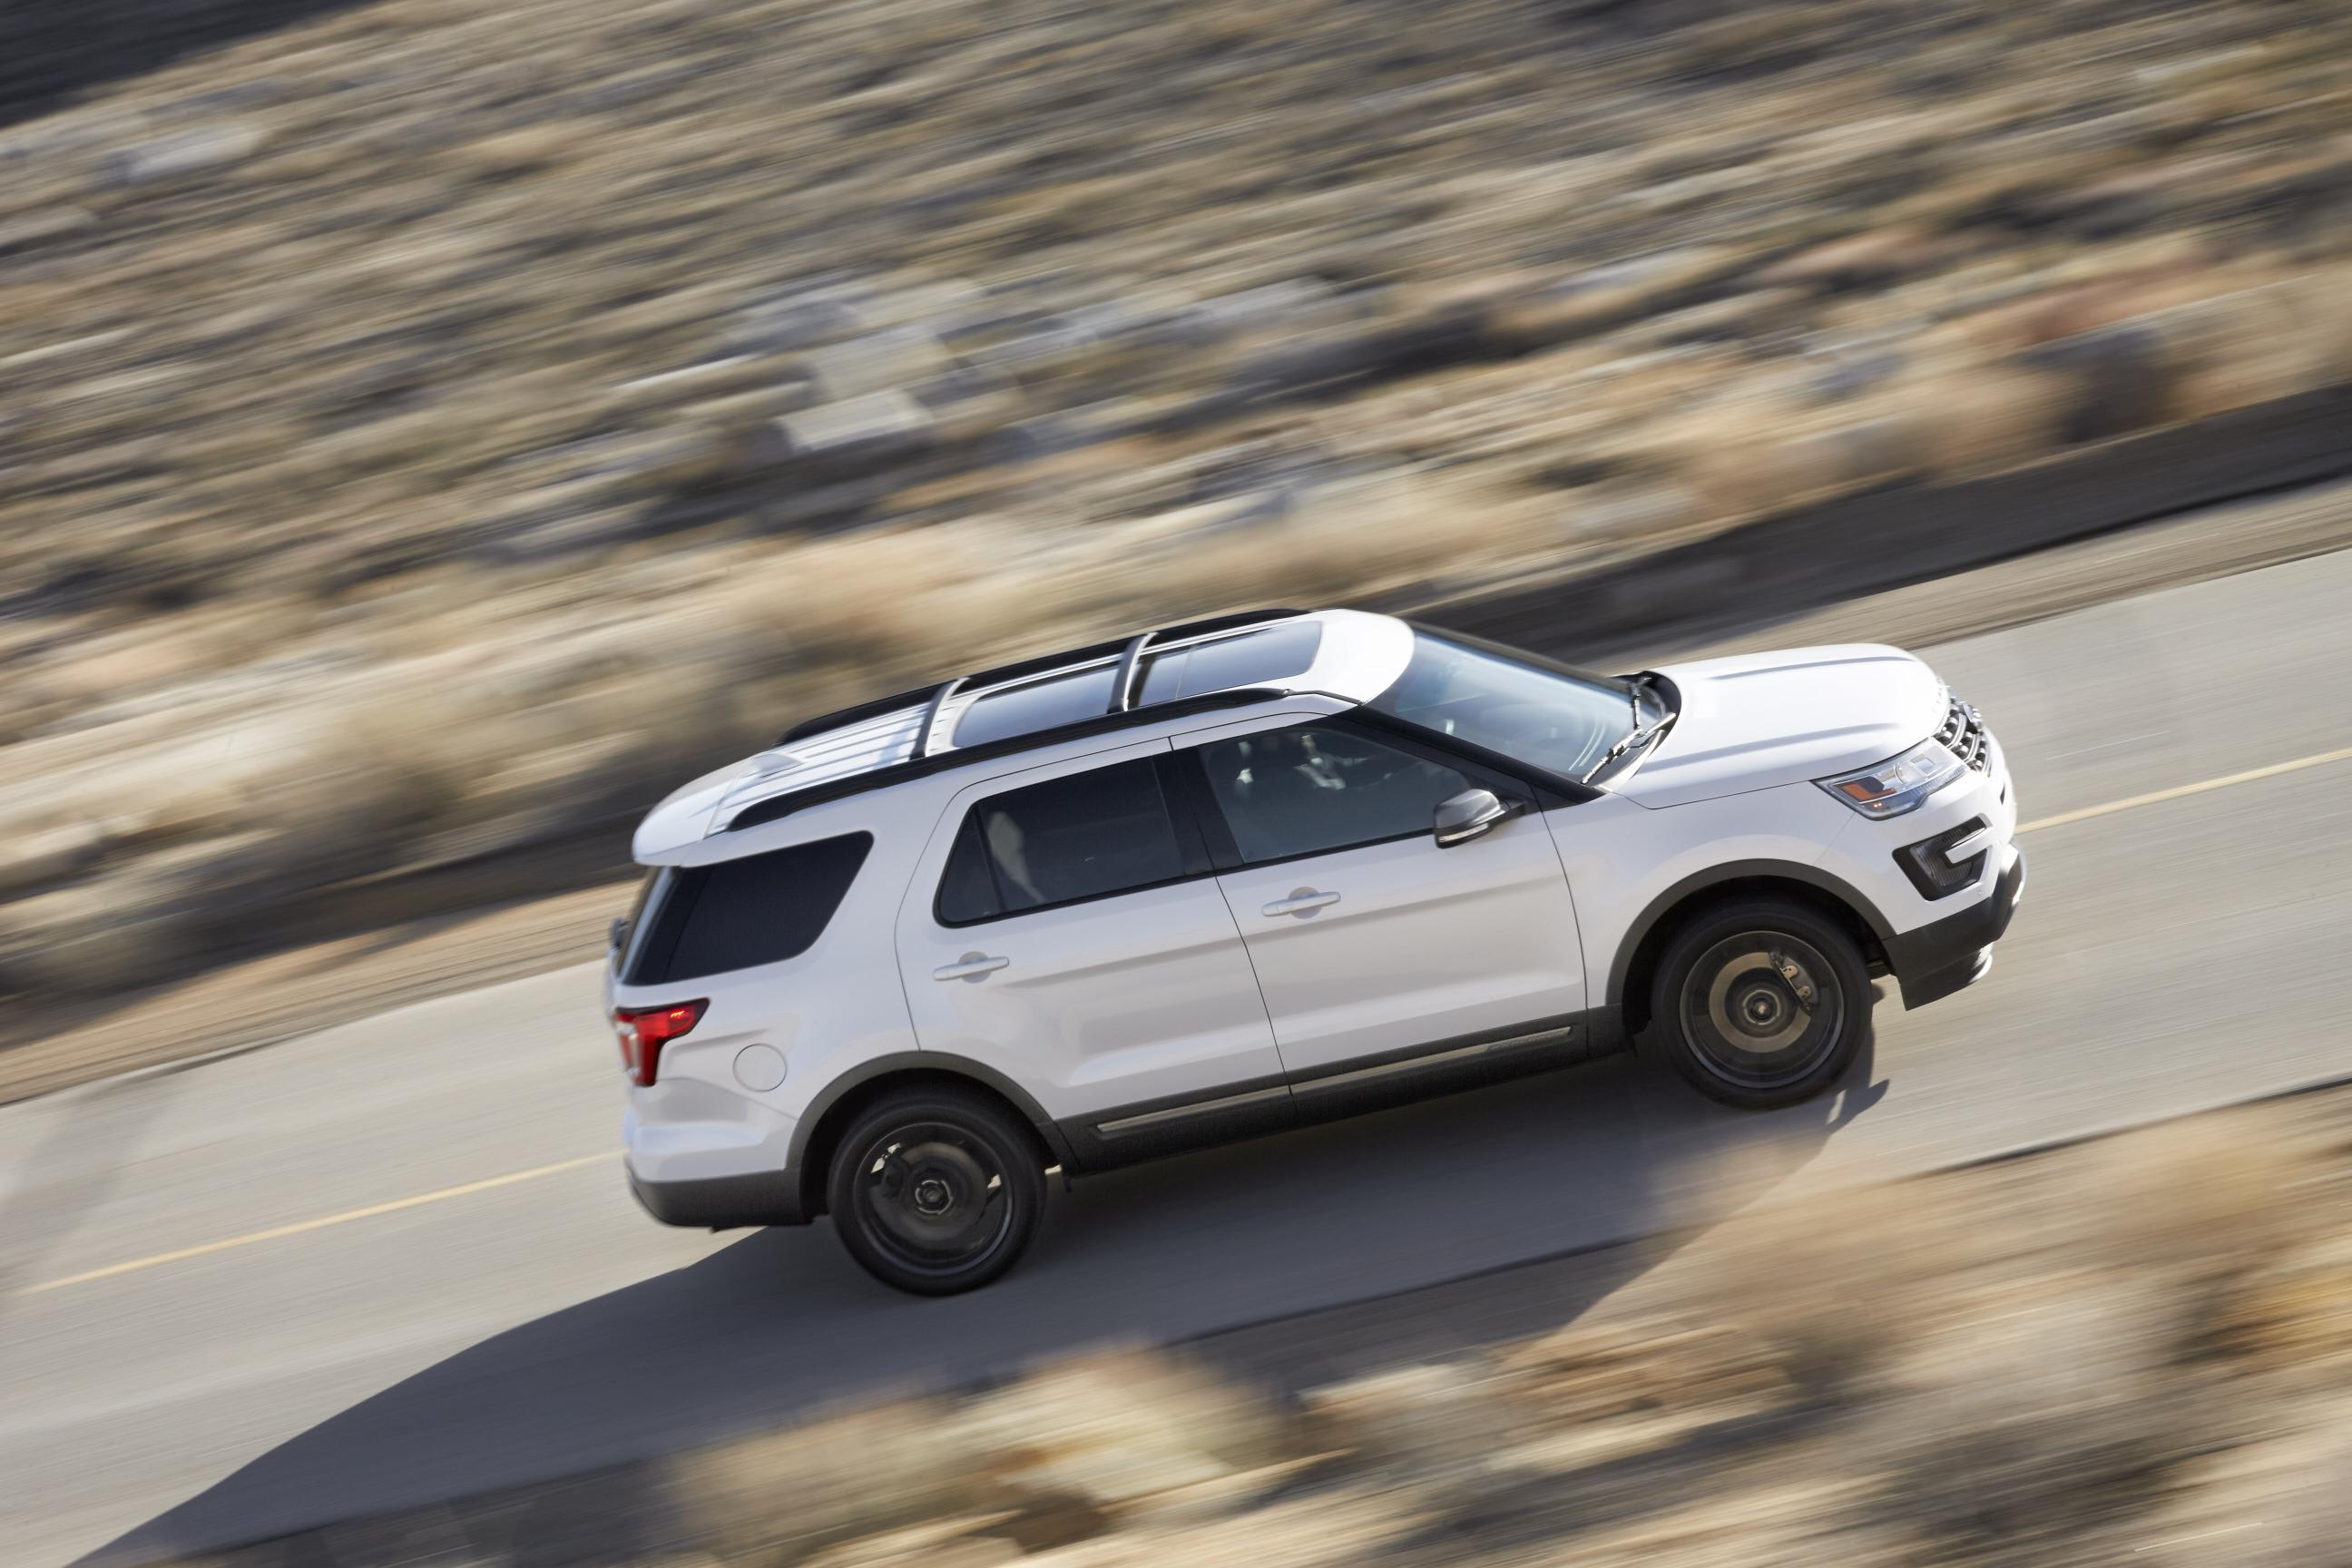 Ford Explorer, one of Ford's top selling vehicles in the USA in 2017